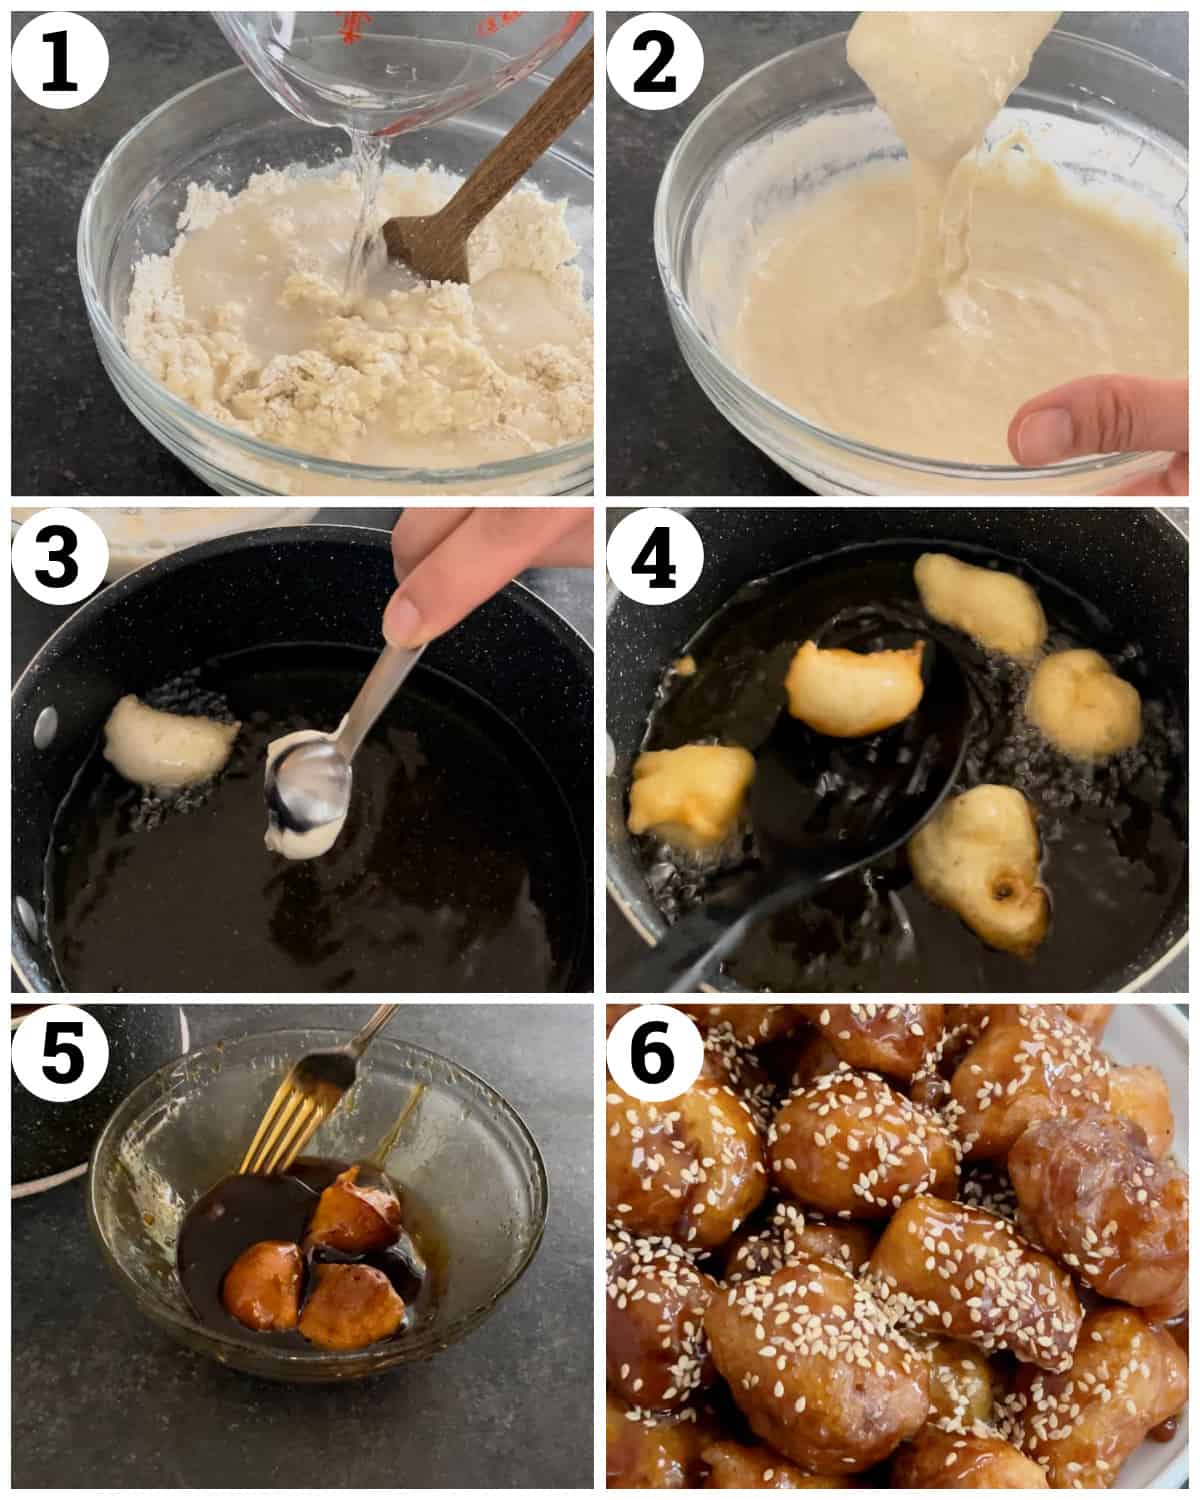 Make the batter and let it proof them drop in the hot oil, fry and toss with the syrup. 